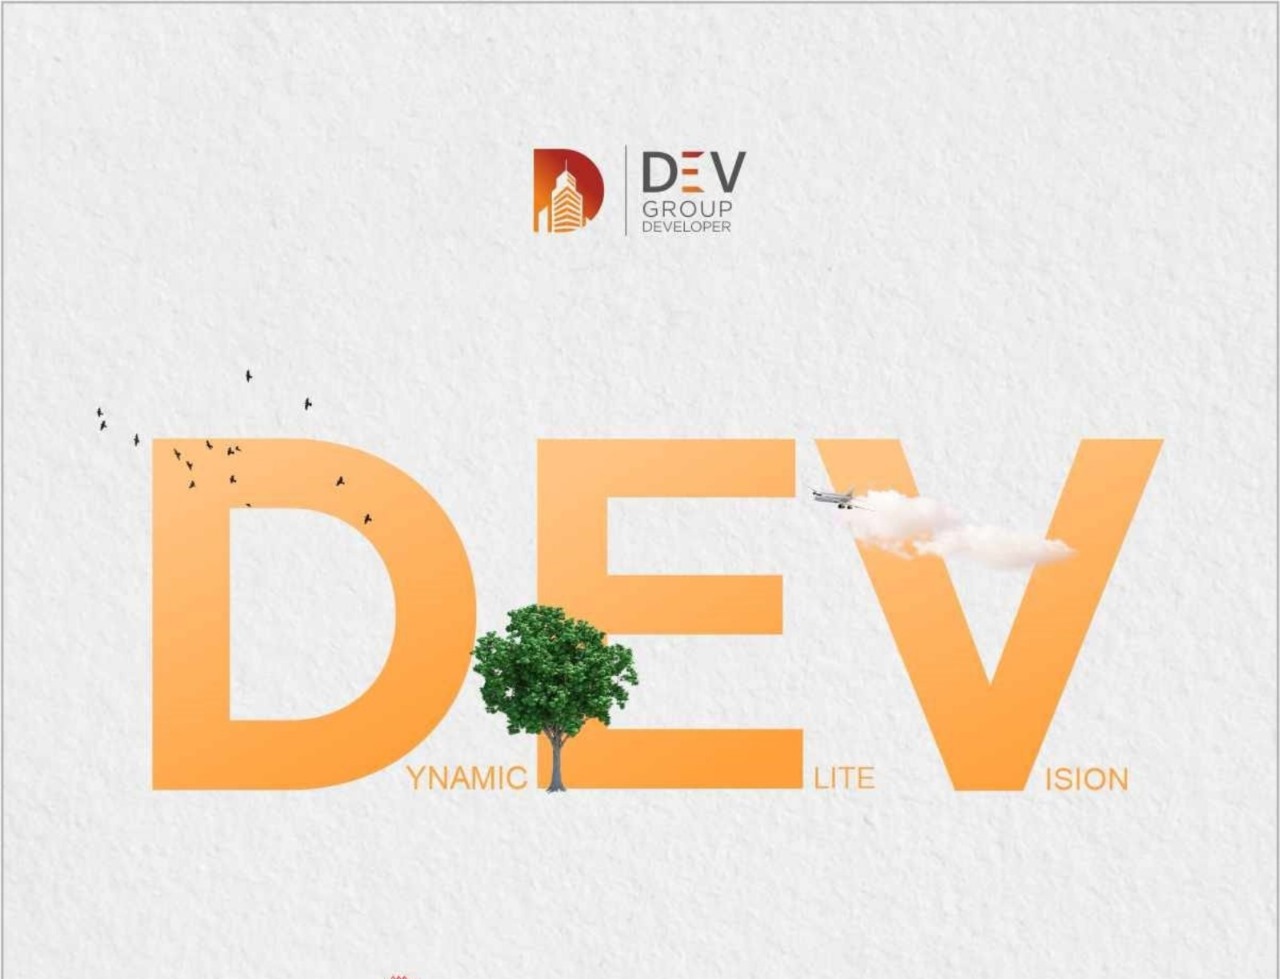 Dev Group: Building Your Dream, One Milestone at a Time